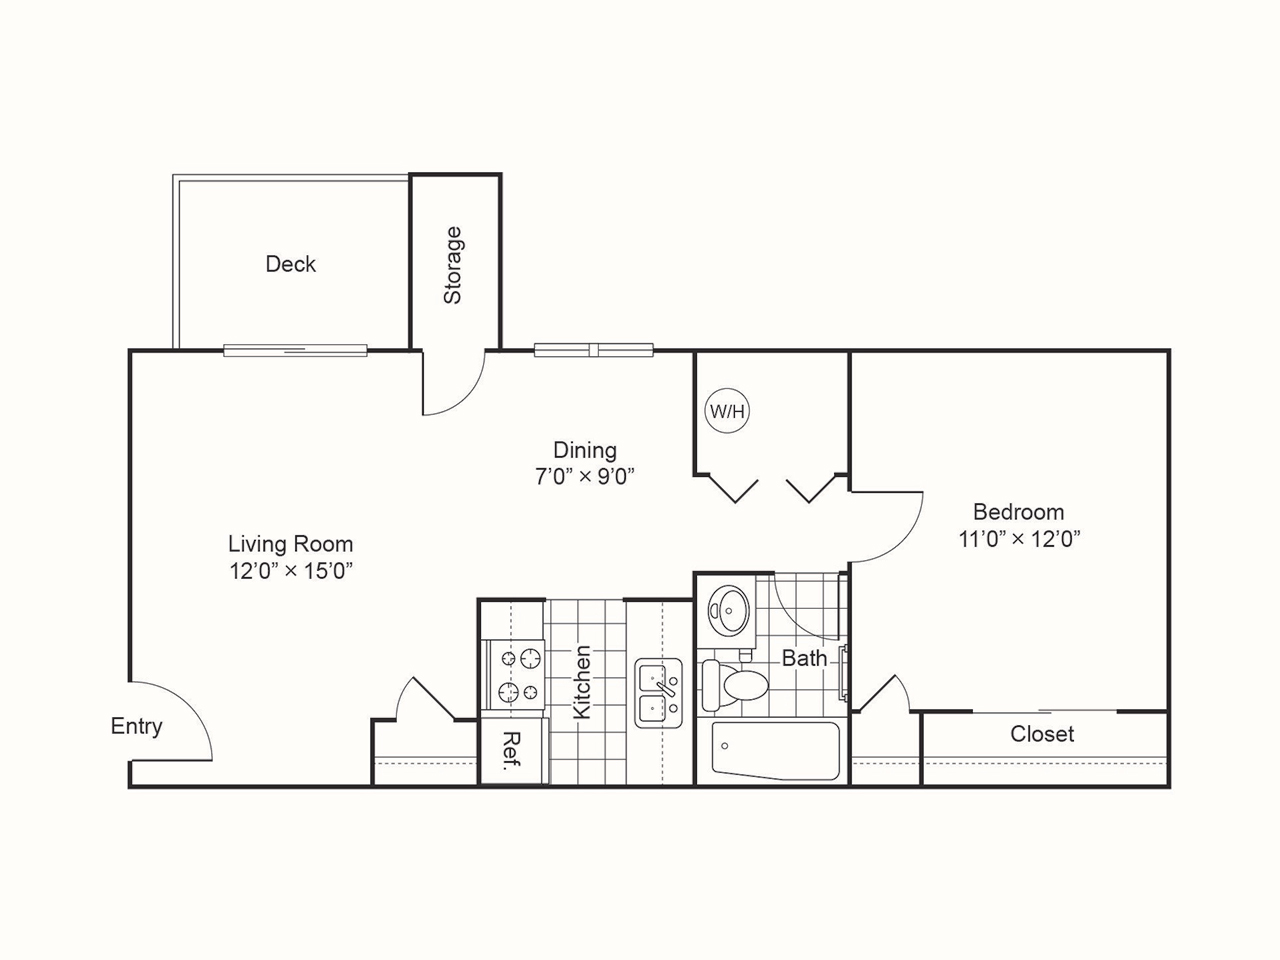 A floor plan for a one bedroom apartment.